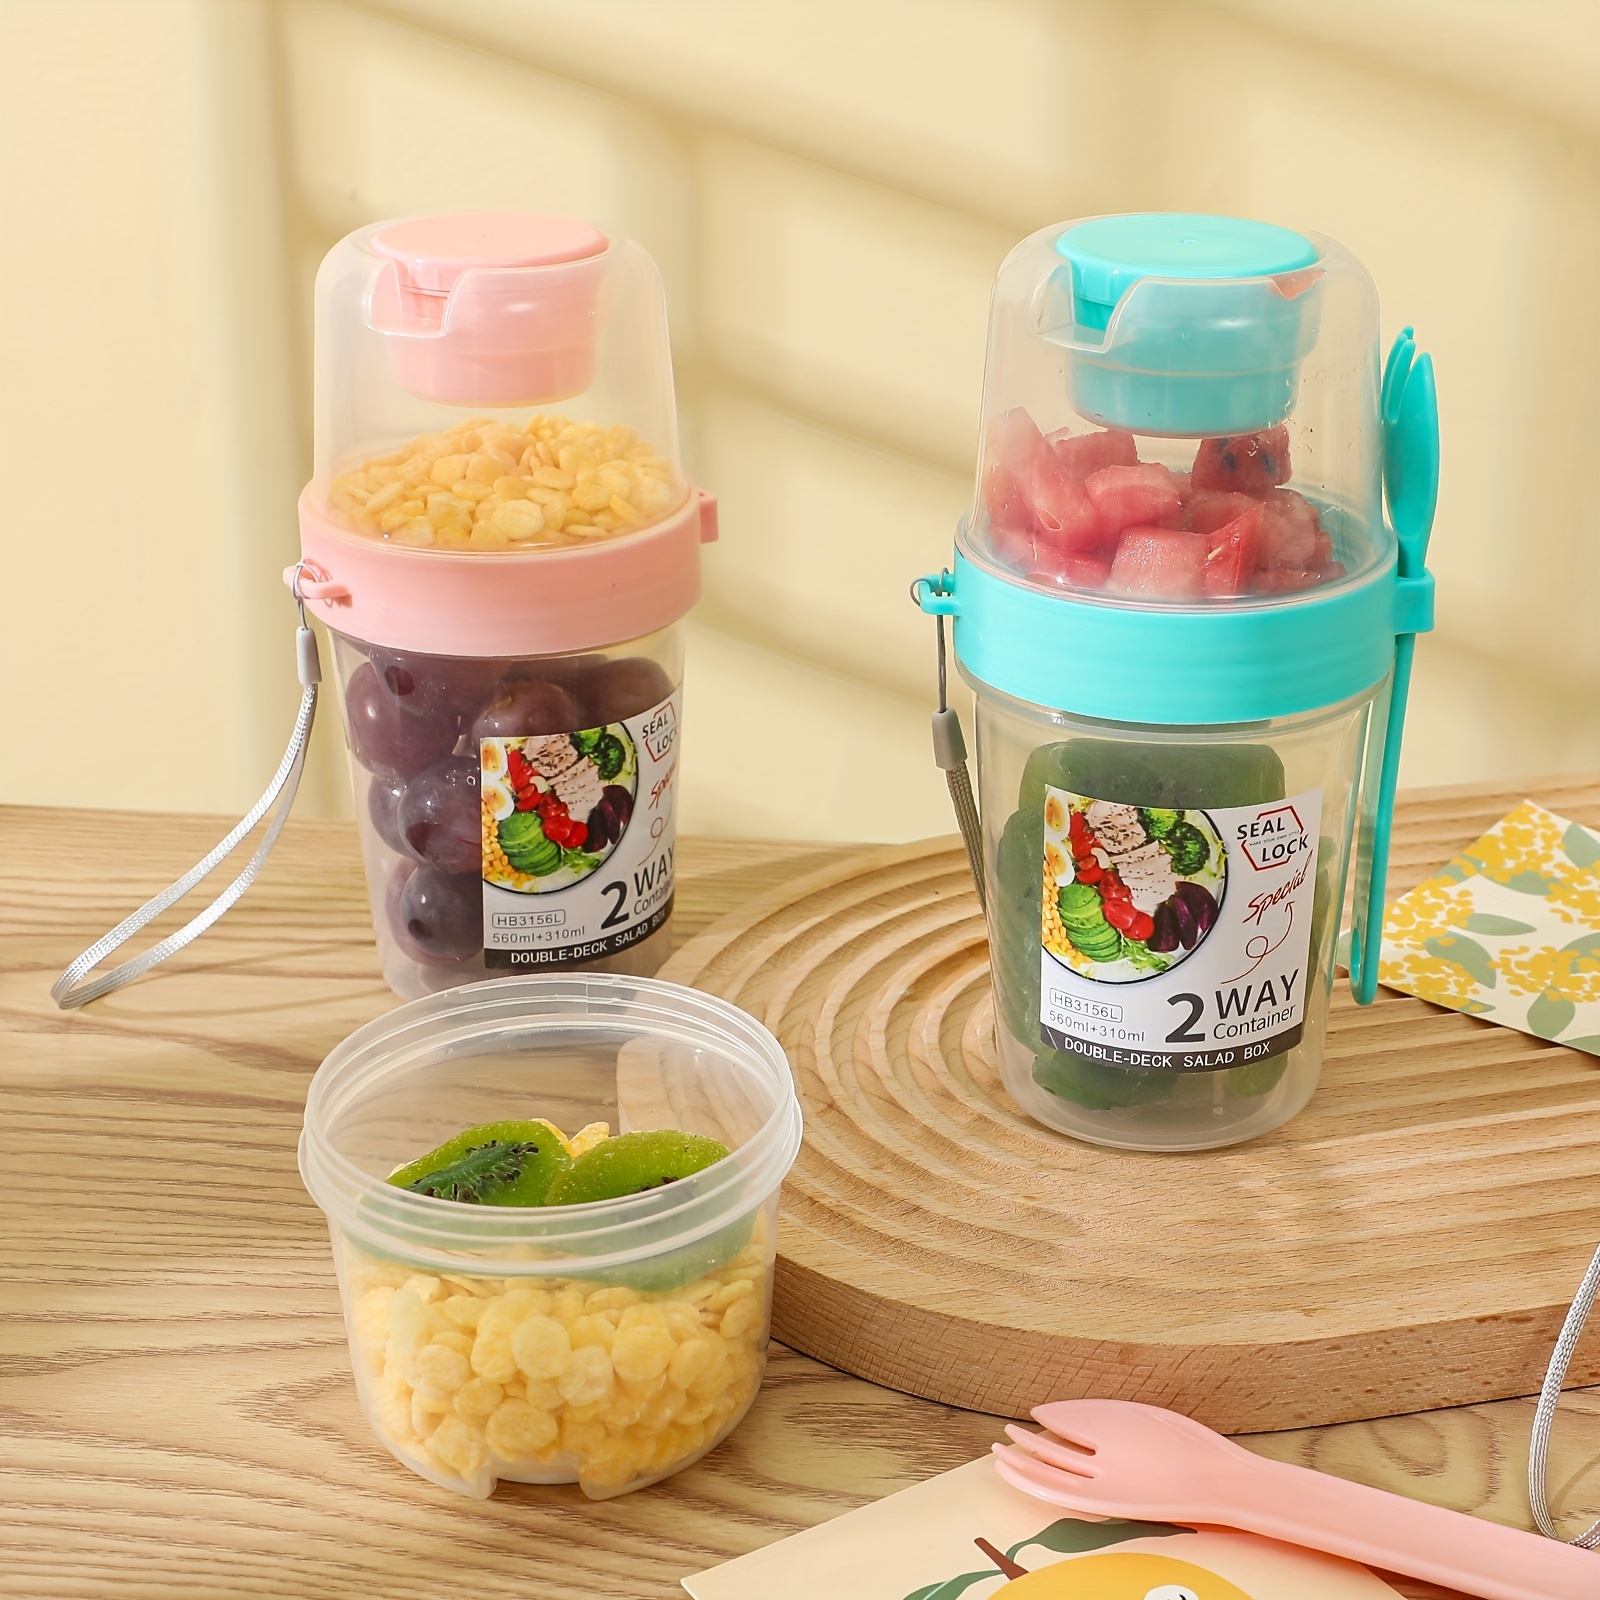 Salad Cup,salad Dressing Container To Go,fresh Salad Cup With Fork